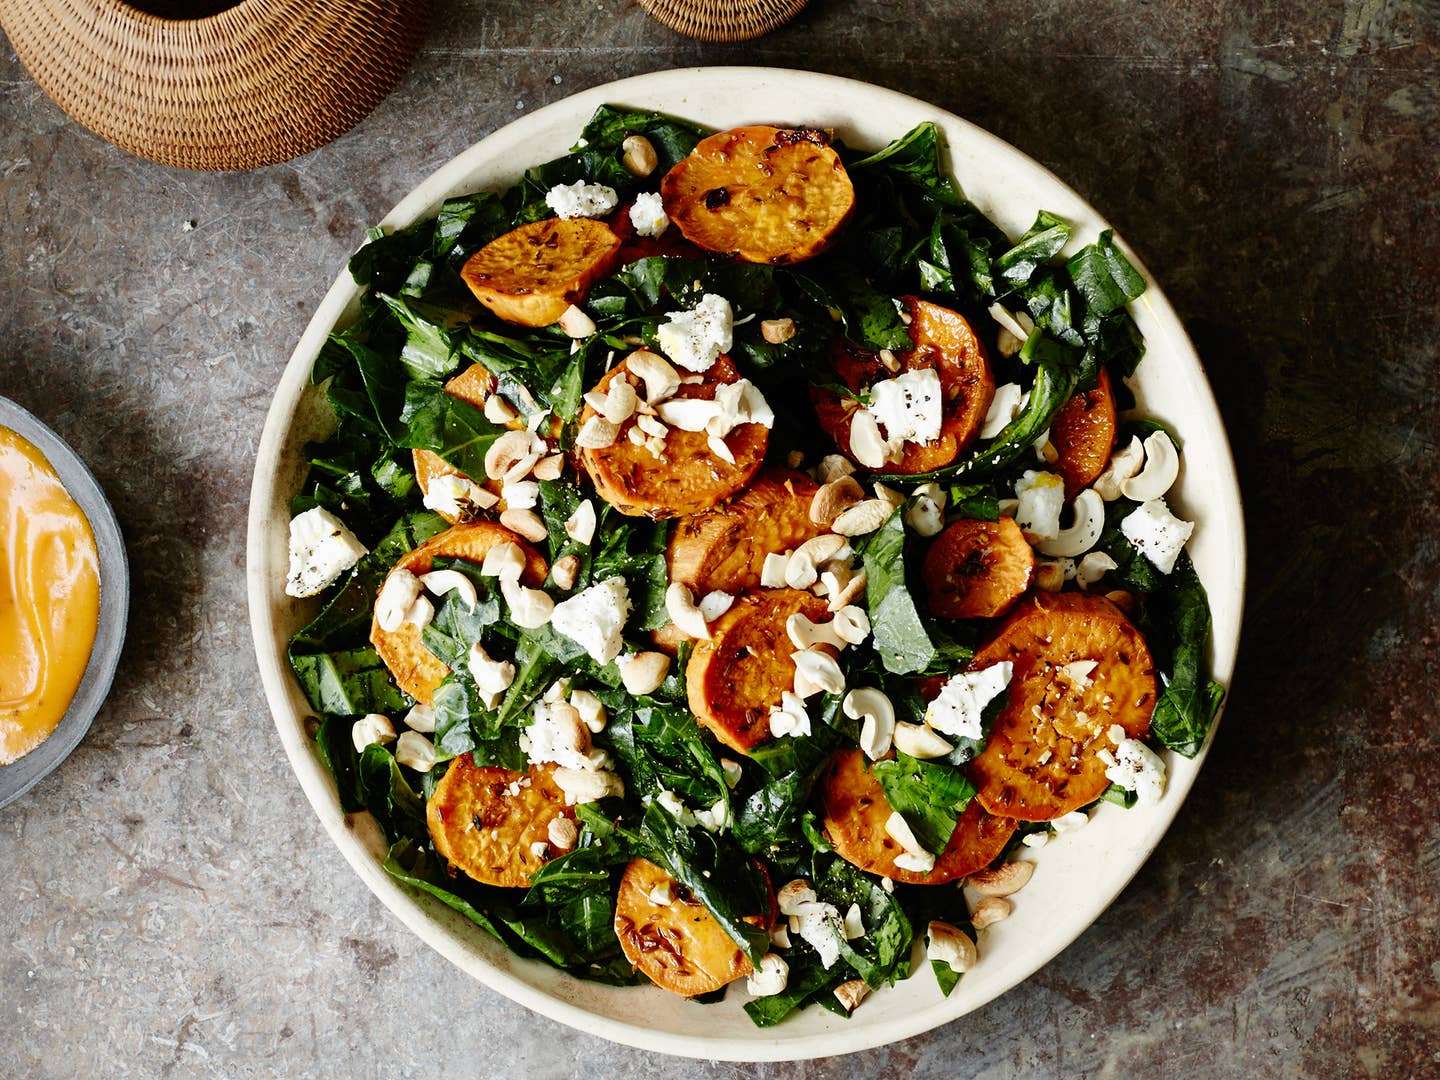 Shredded Collard Green Salad with Roasted Sweet Potatoes and Cashews